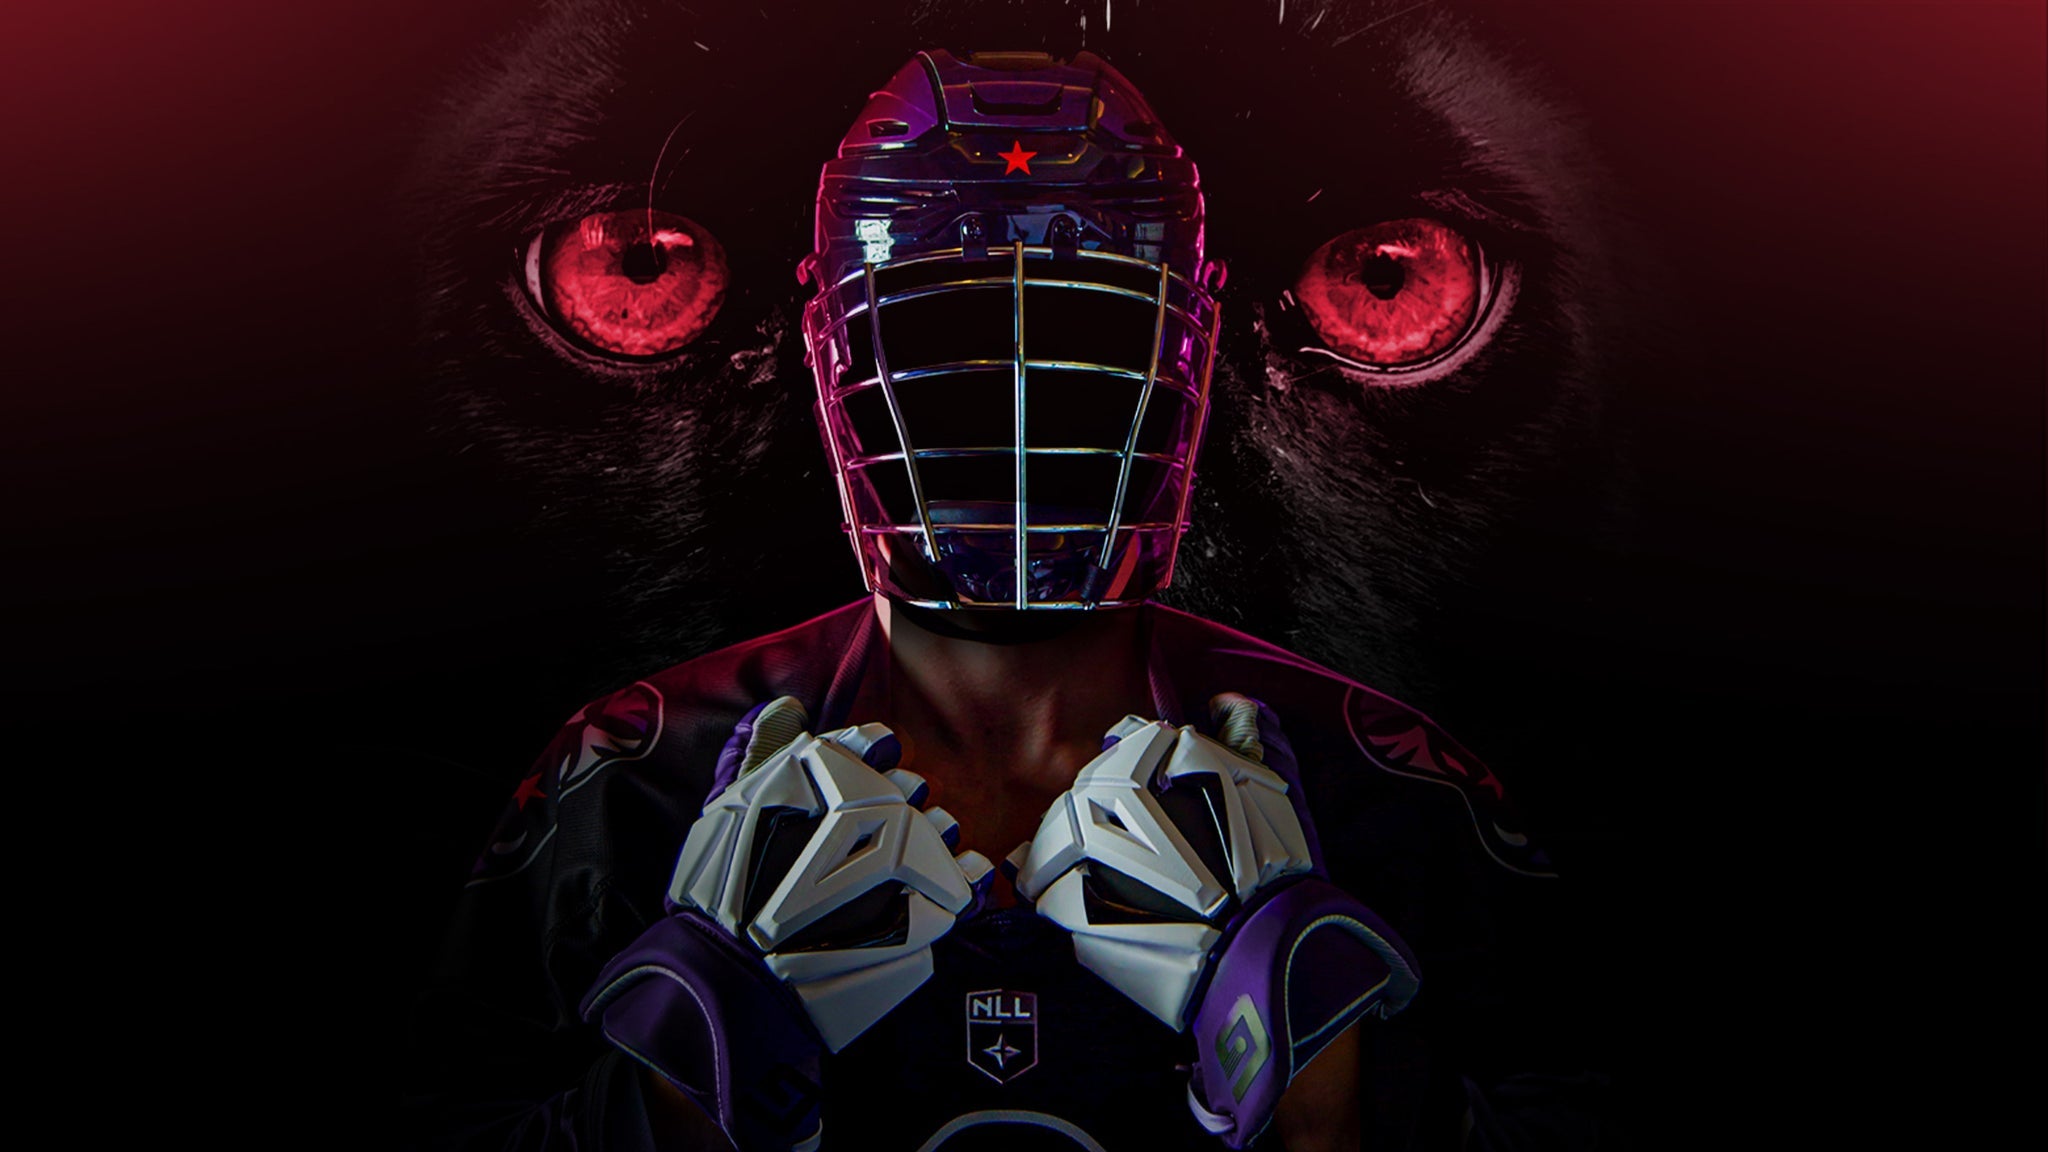 Suites: Panther City Lacrosse Club vs. Calgary Roughnecks in Fort Worth promo photo for Resale Only presale offer code